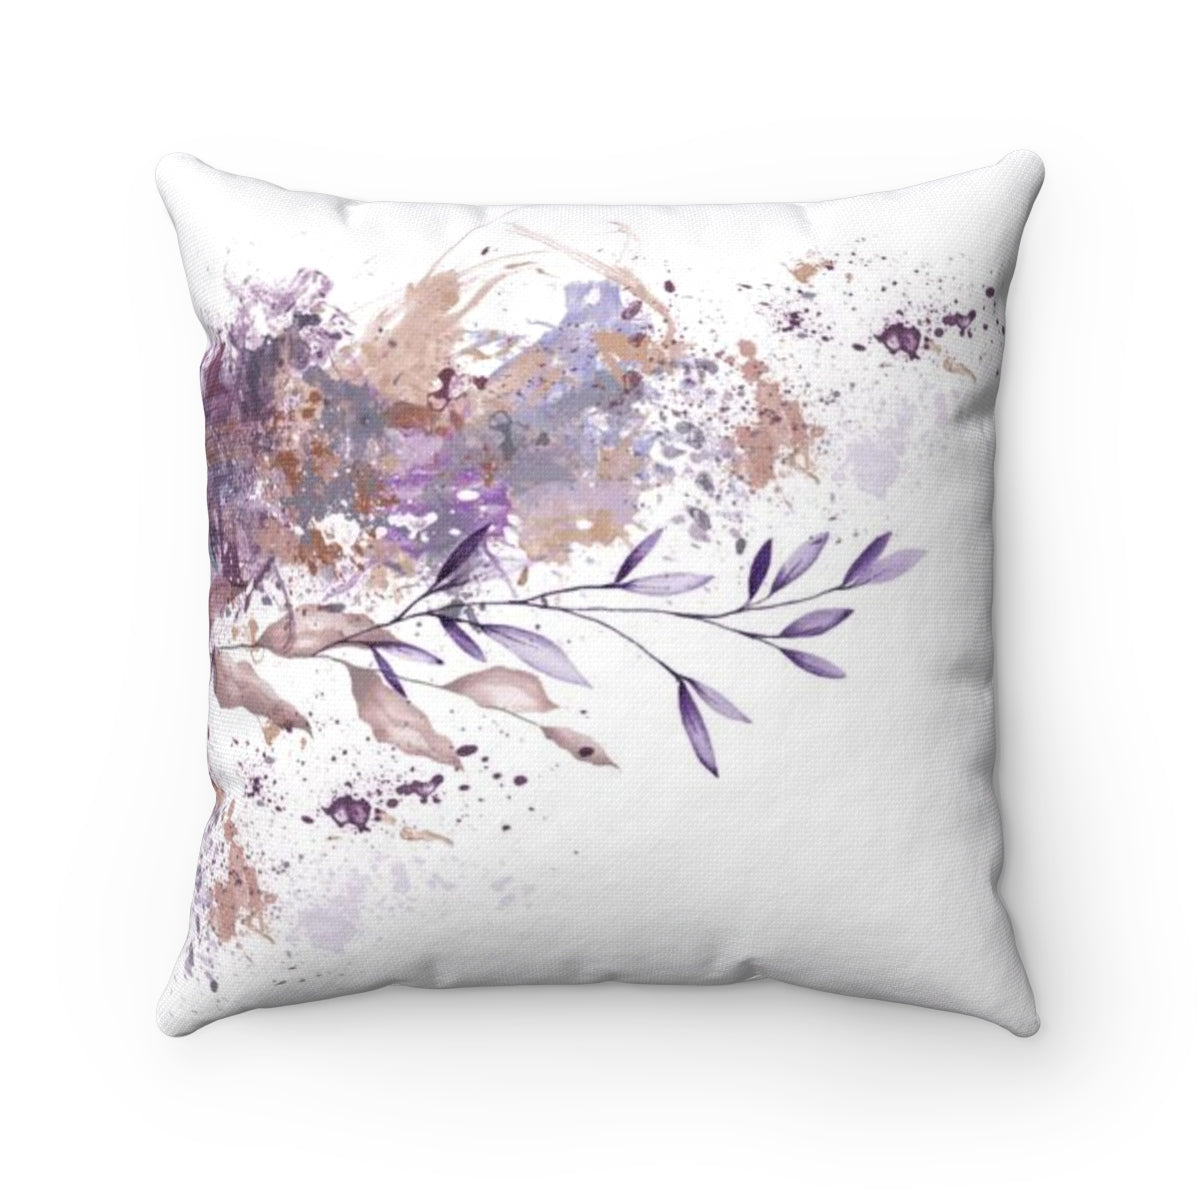 Purple decorative throw pillow with abstract art design